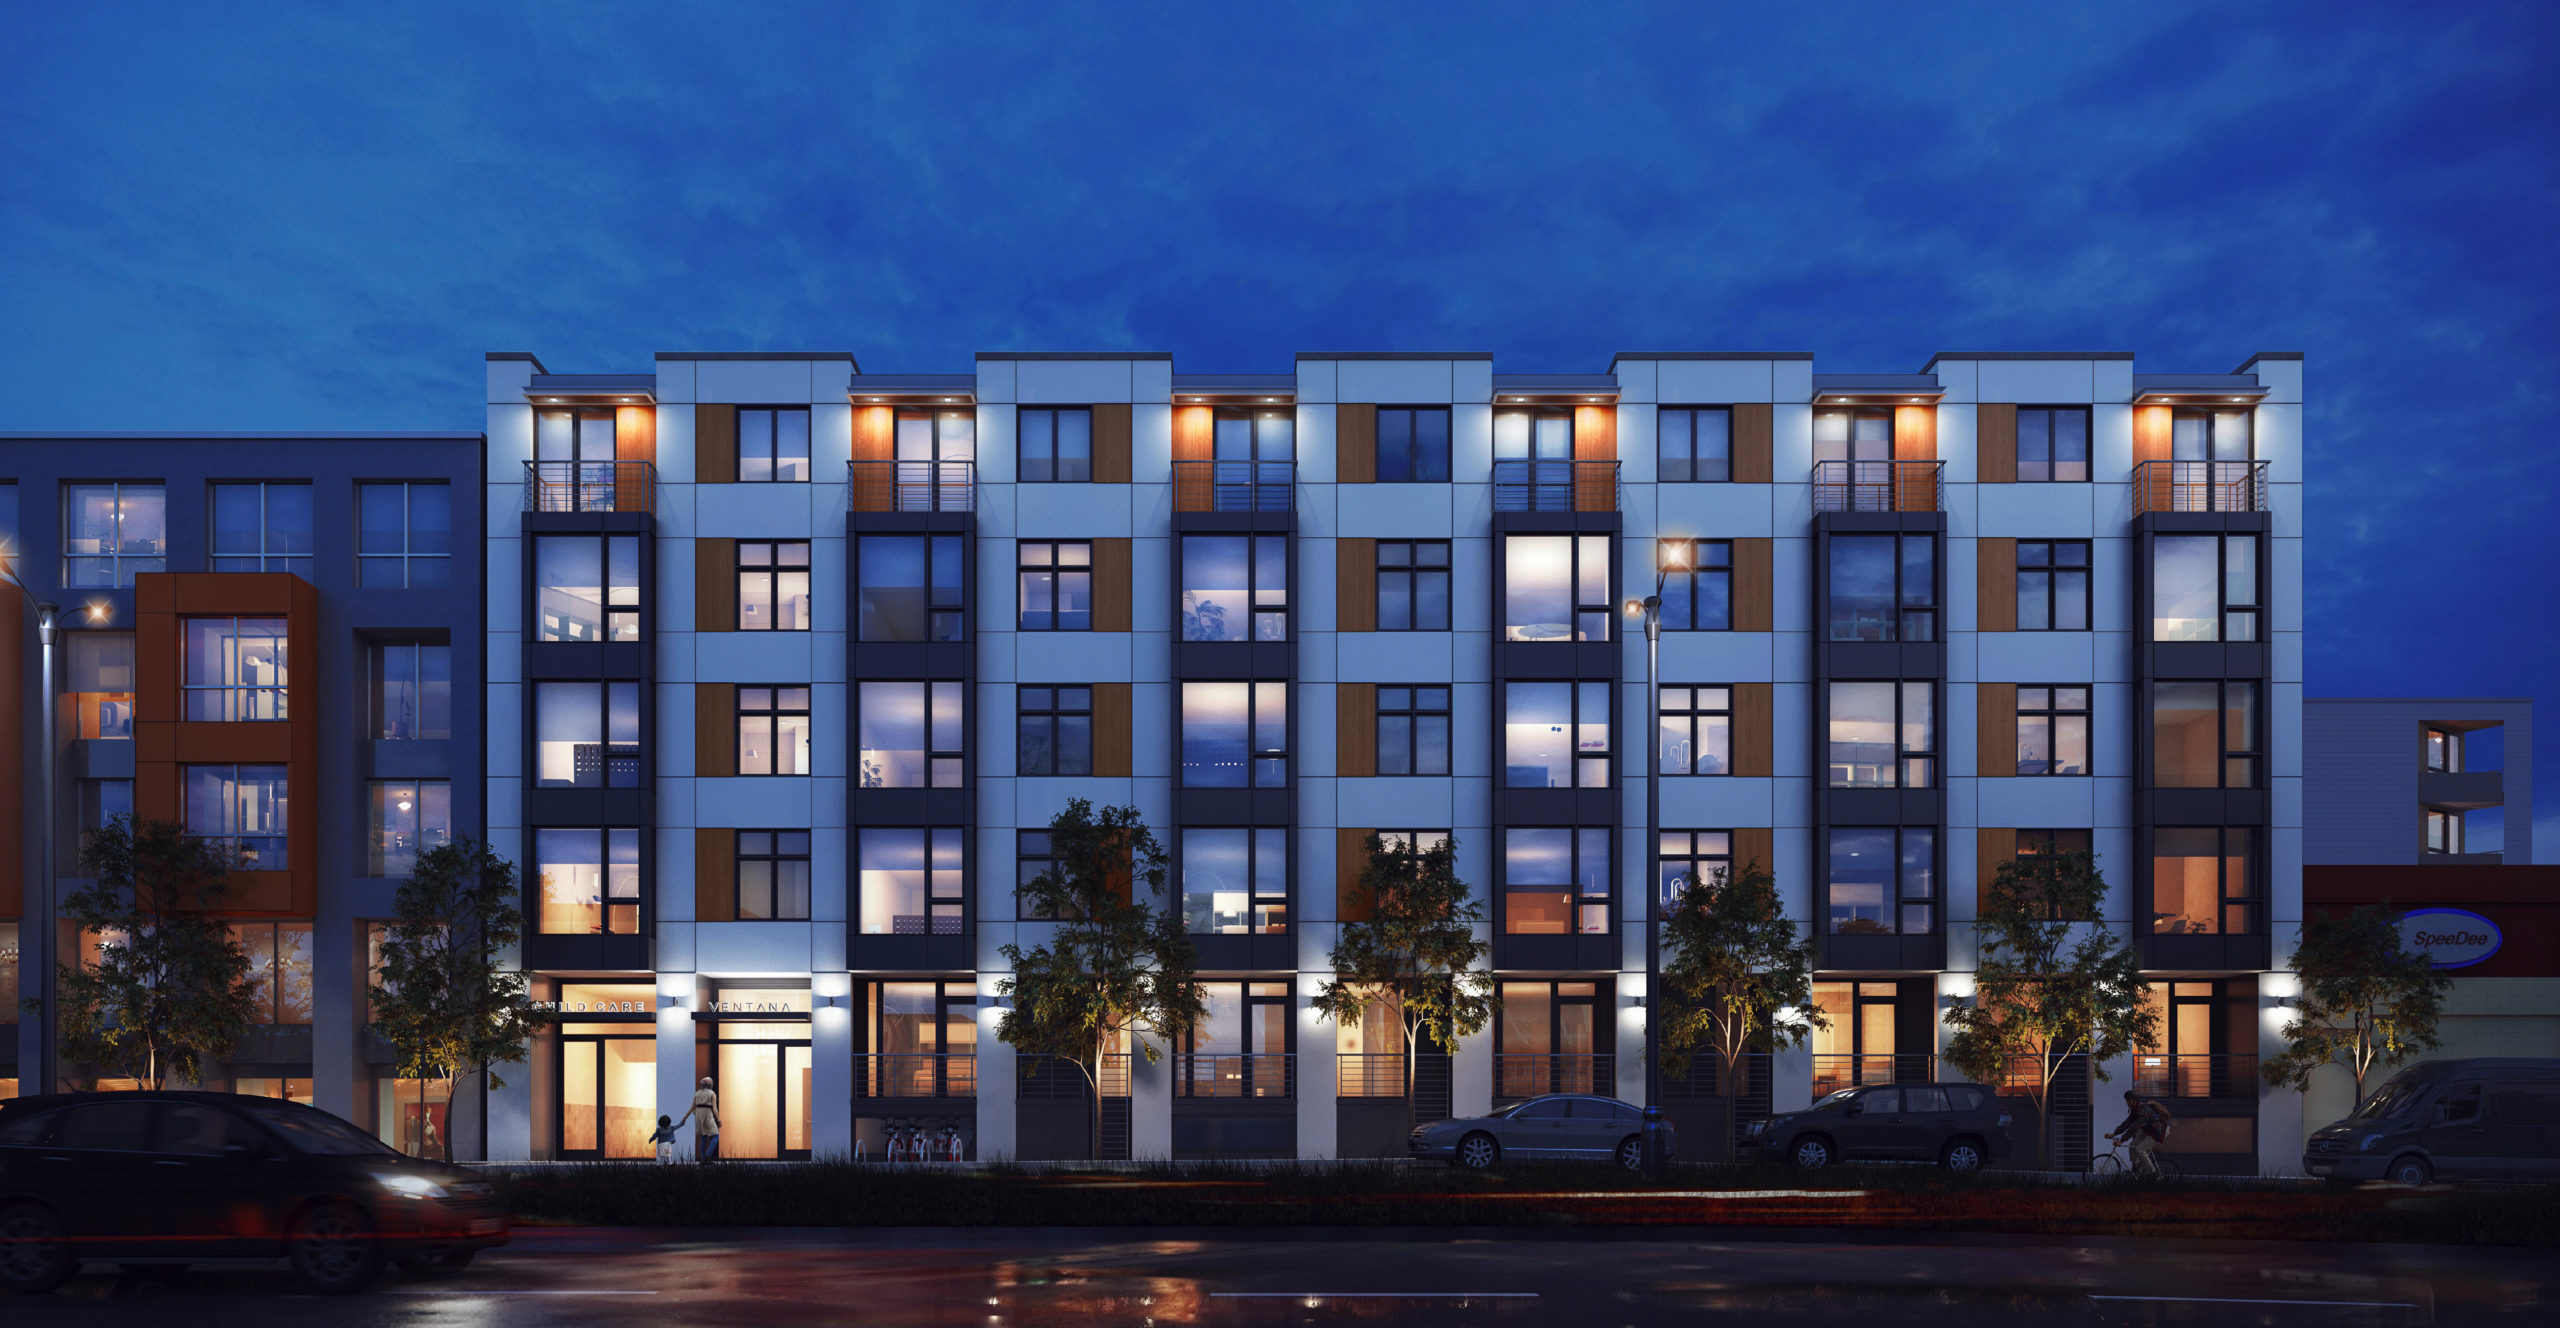 99 Ocean Avenue along Alemany Boulevard, rendering by RG Architecture